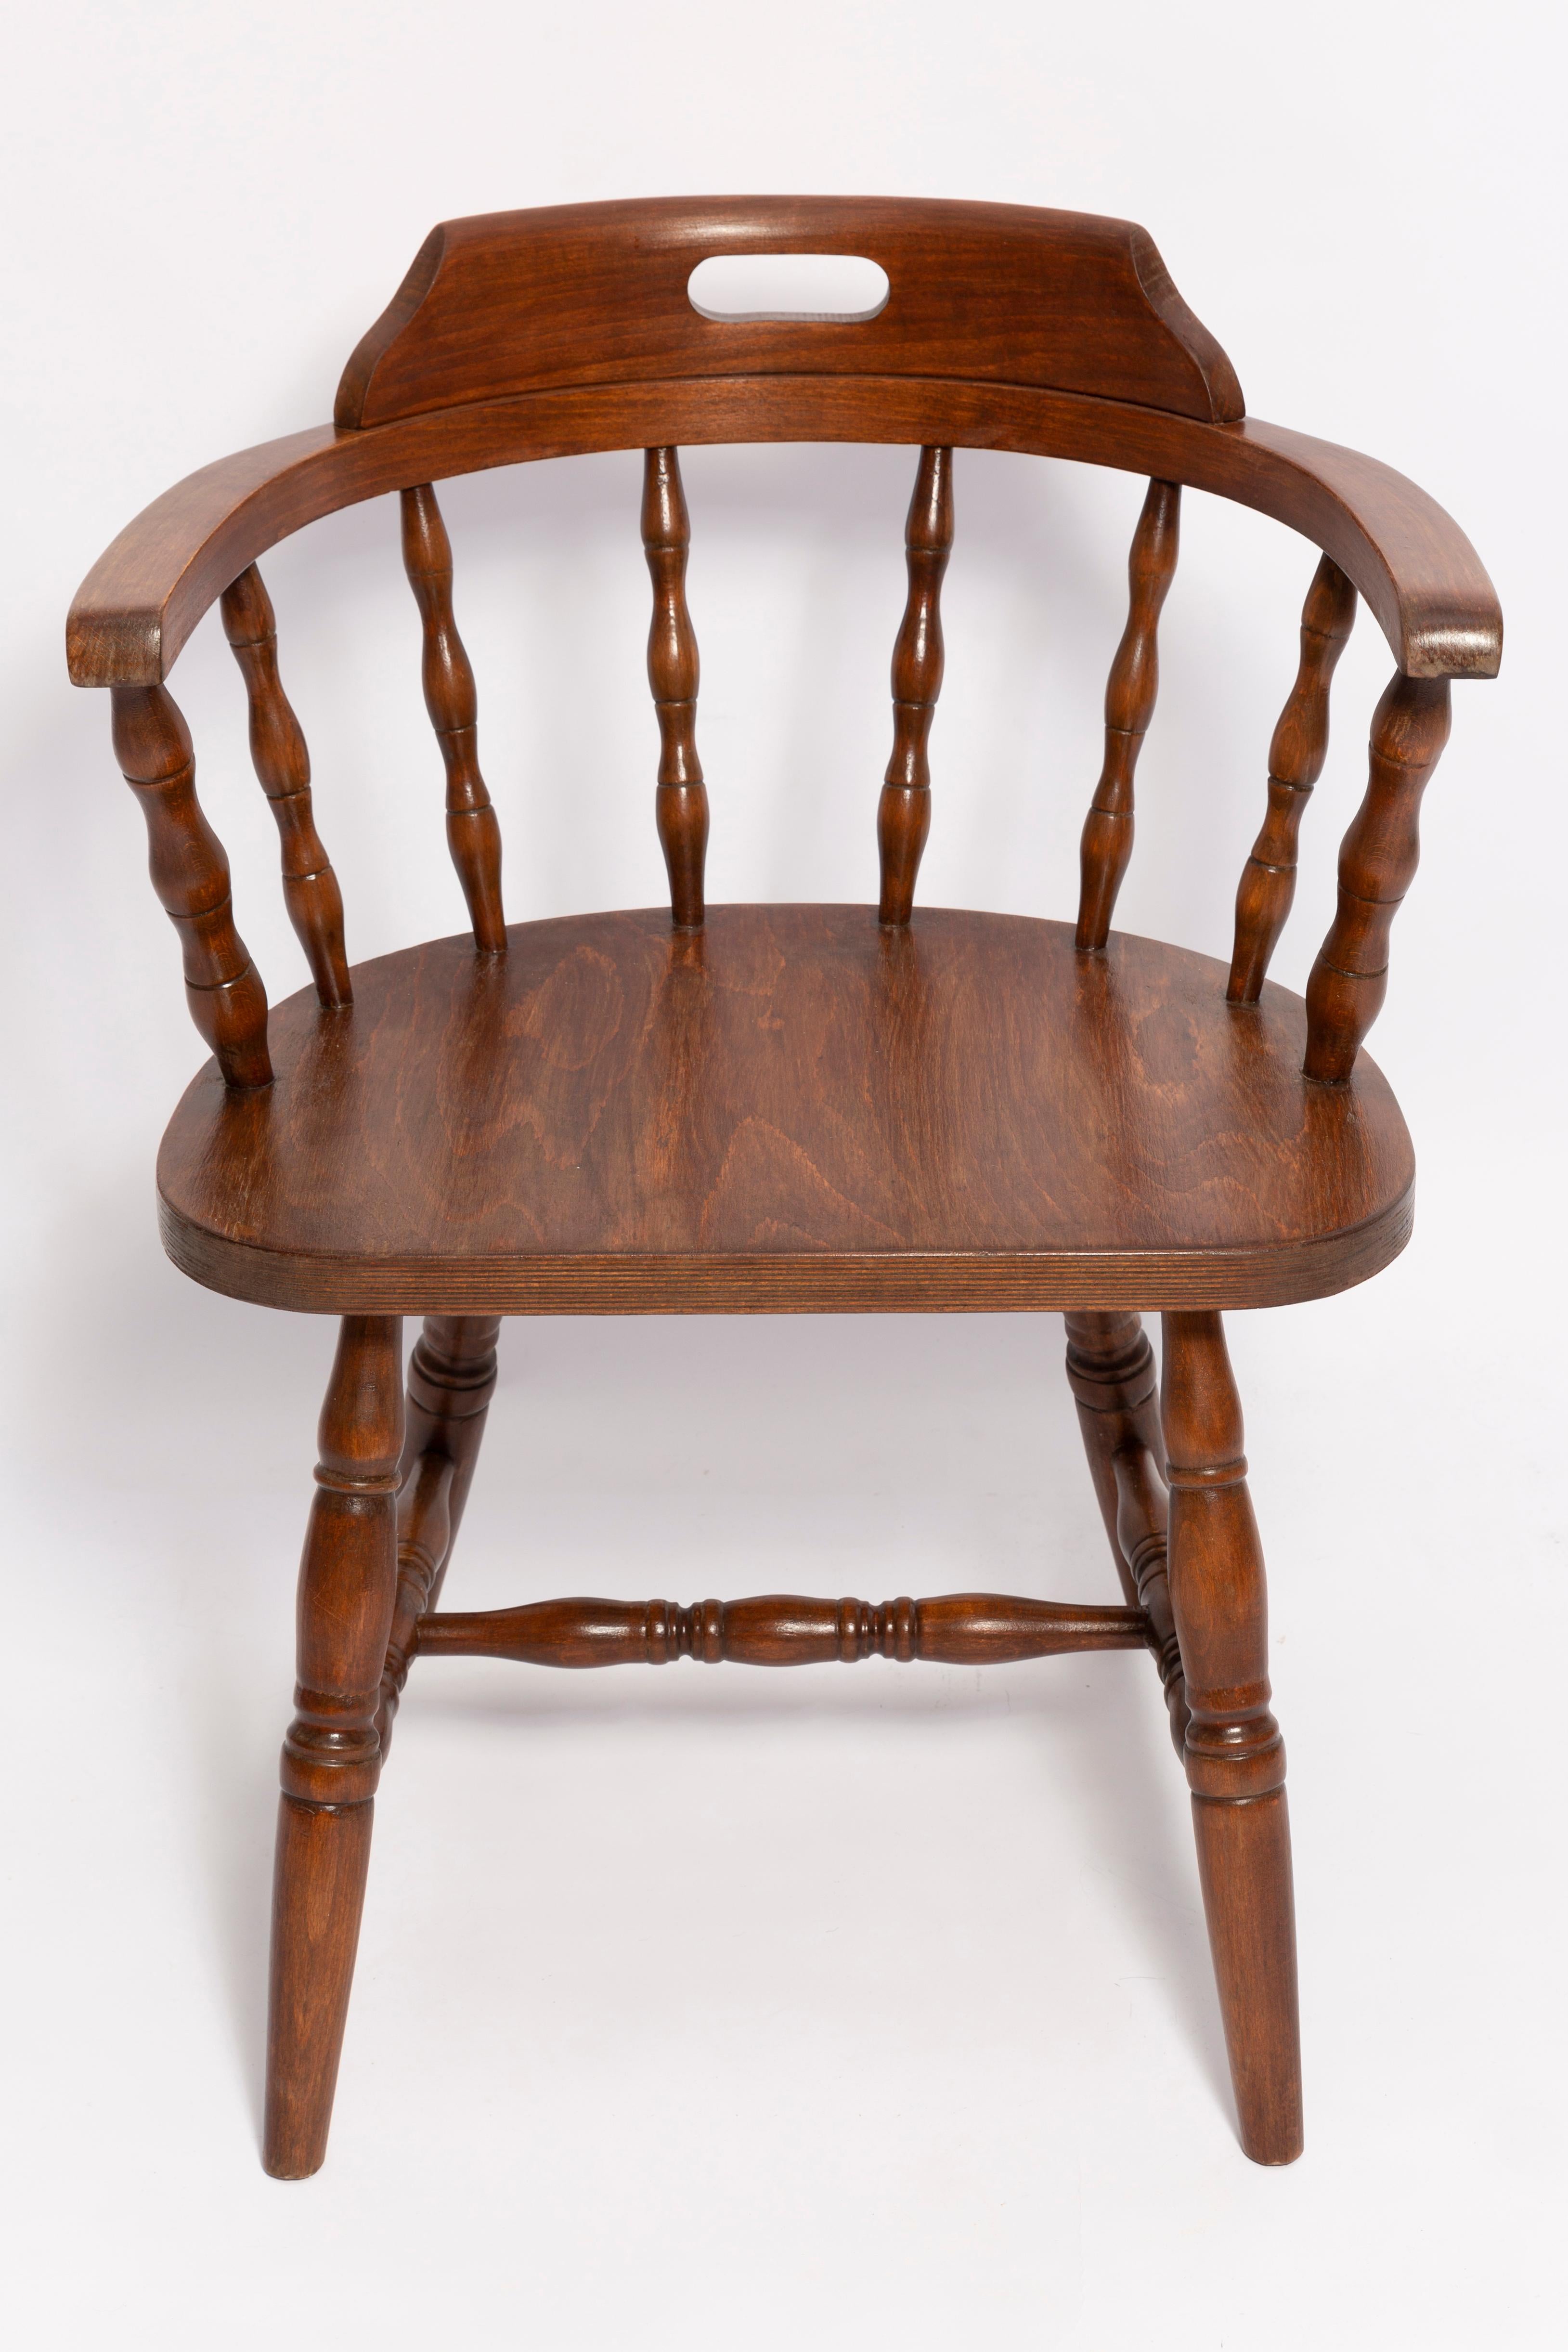 Chair designed by prof. Rajmund Halas. Is is called Bonanza Chair. 

Made of beechwood. Chair is after a complete renovation, the woodwork has been refreshed. 

Chair is stabile and very shapely. 

Chair was produced in former furniture